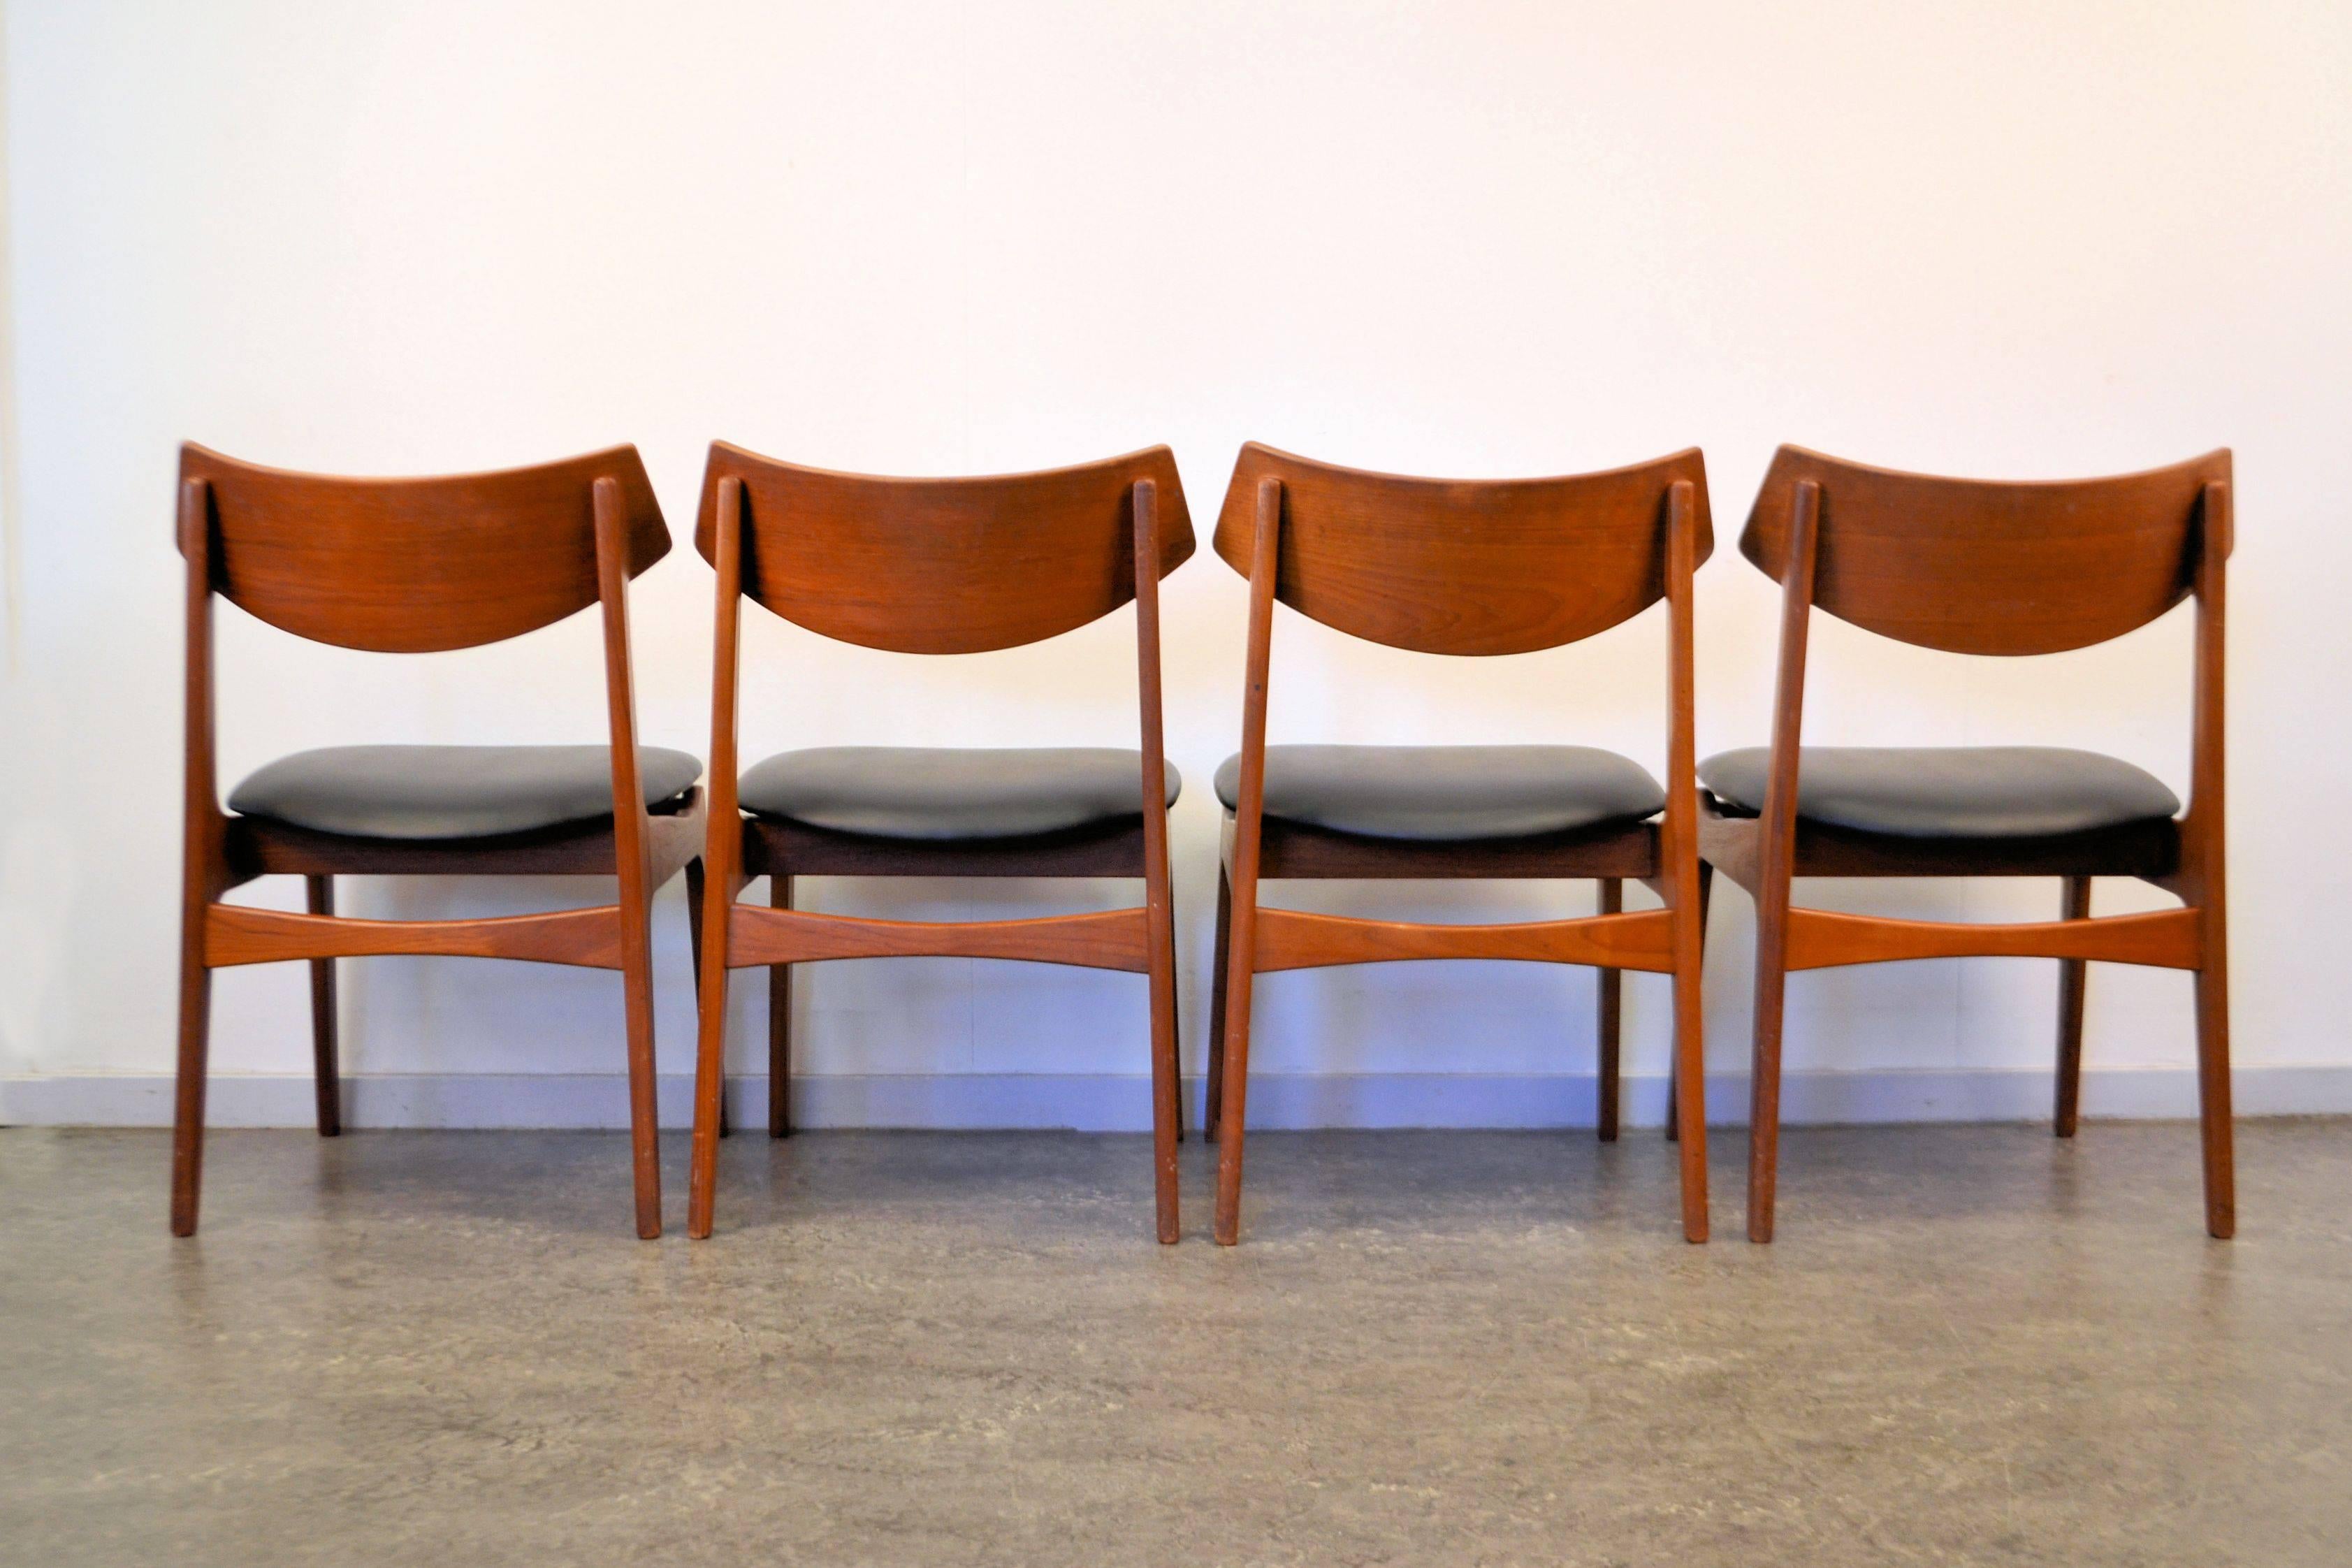 Set of four Danish Modern dining chairs designed and manufactured by Funder-Schmidt & Madsen, Denmark. Stylish curved backrests, new foam and skai leather upholstery. This stylish set fits right around your modern or vintage dining table.